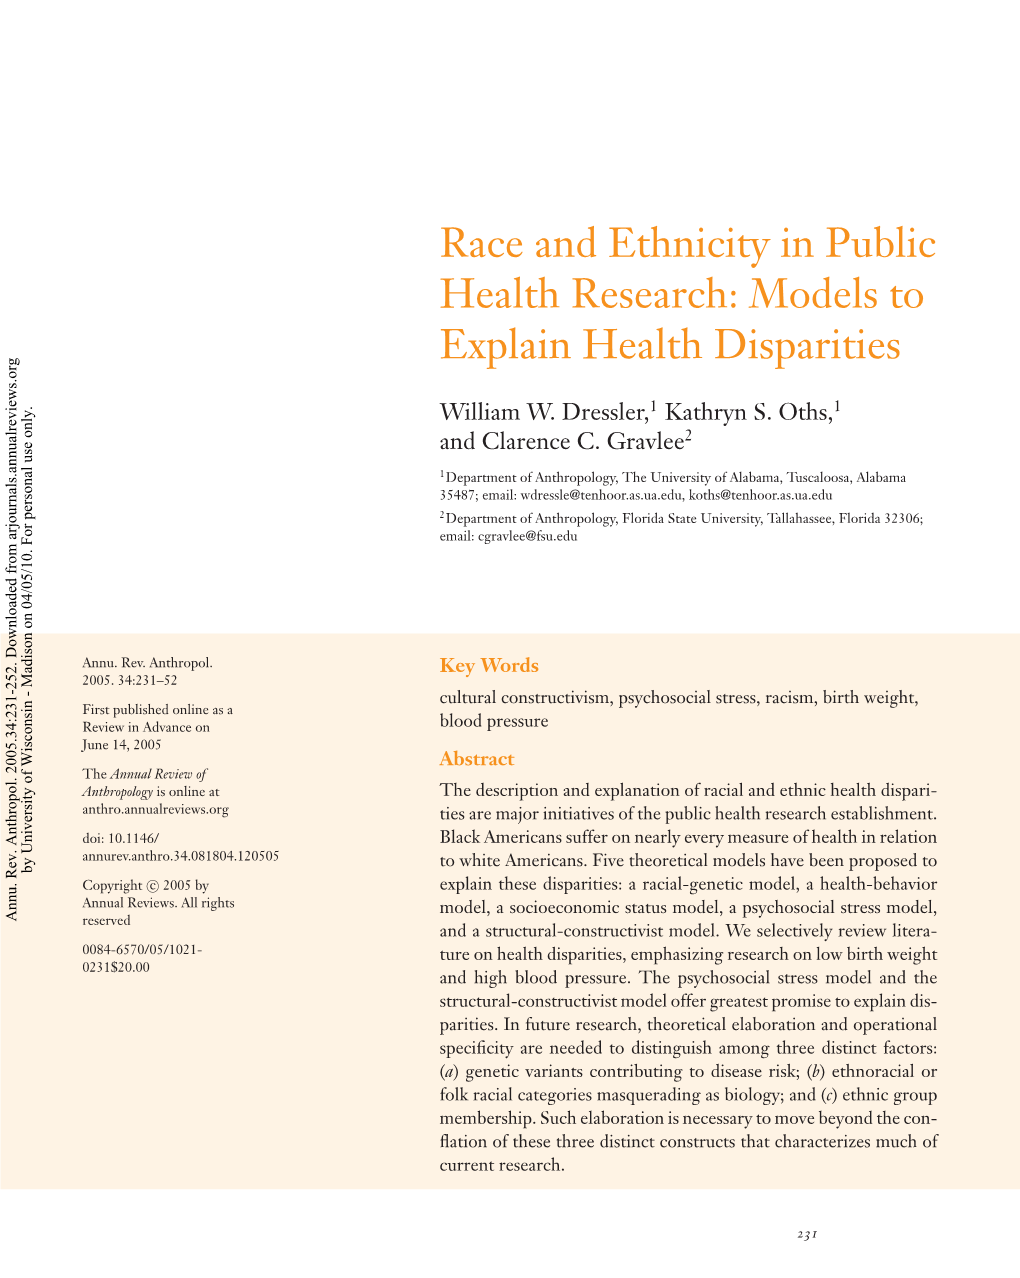 Race and Ethnicity in Public Health Research: Models to Explain Health Disparities